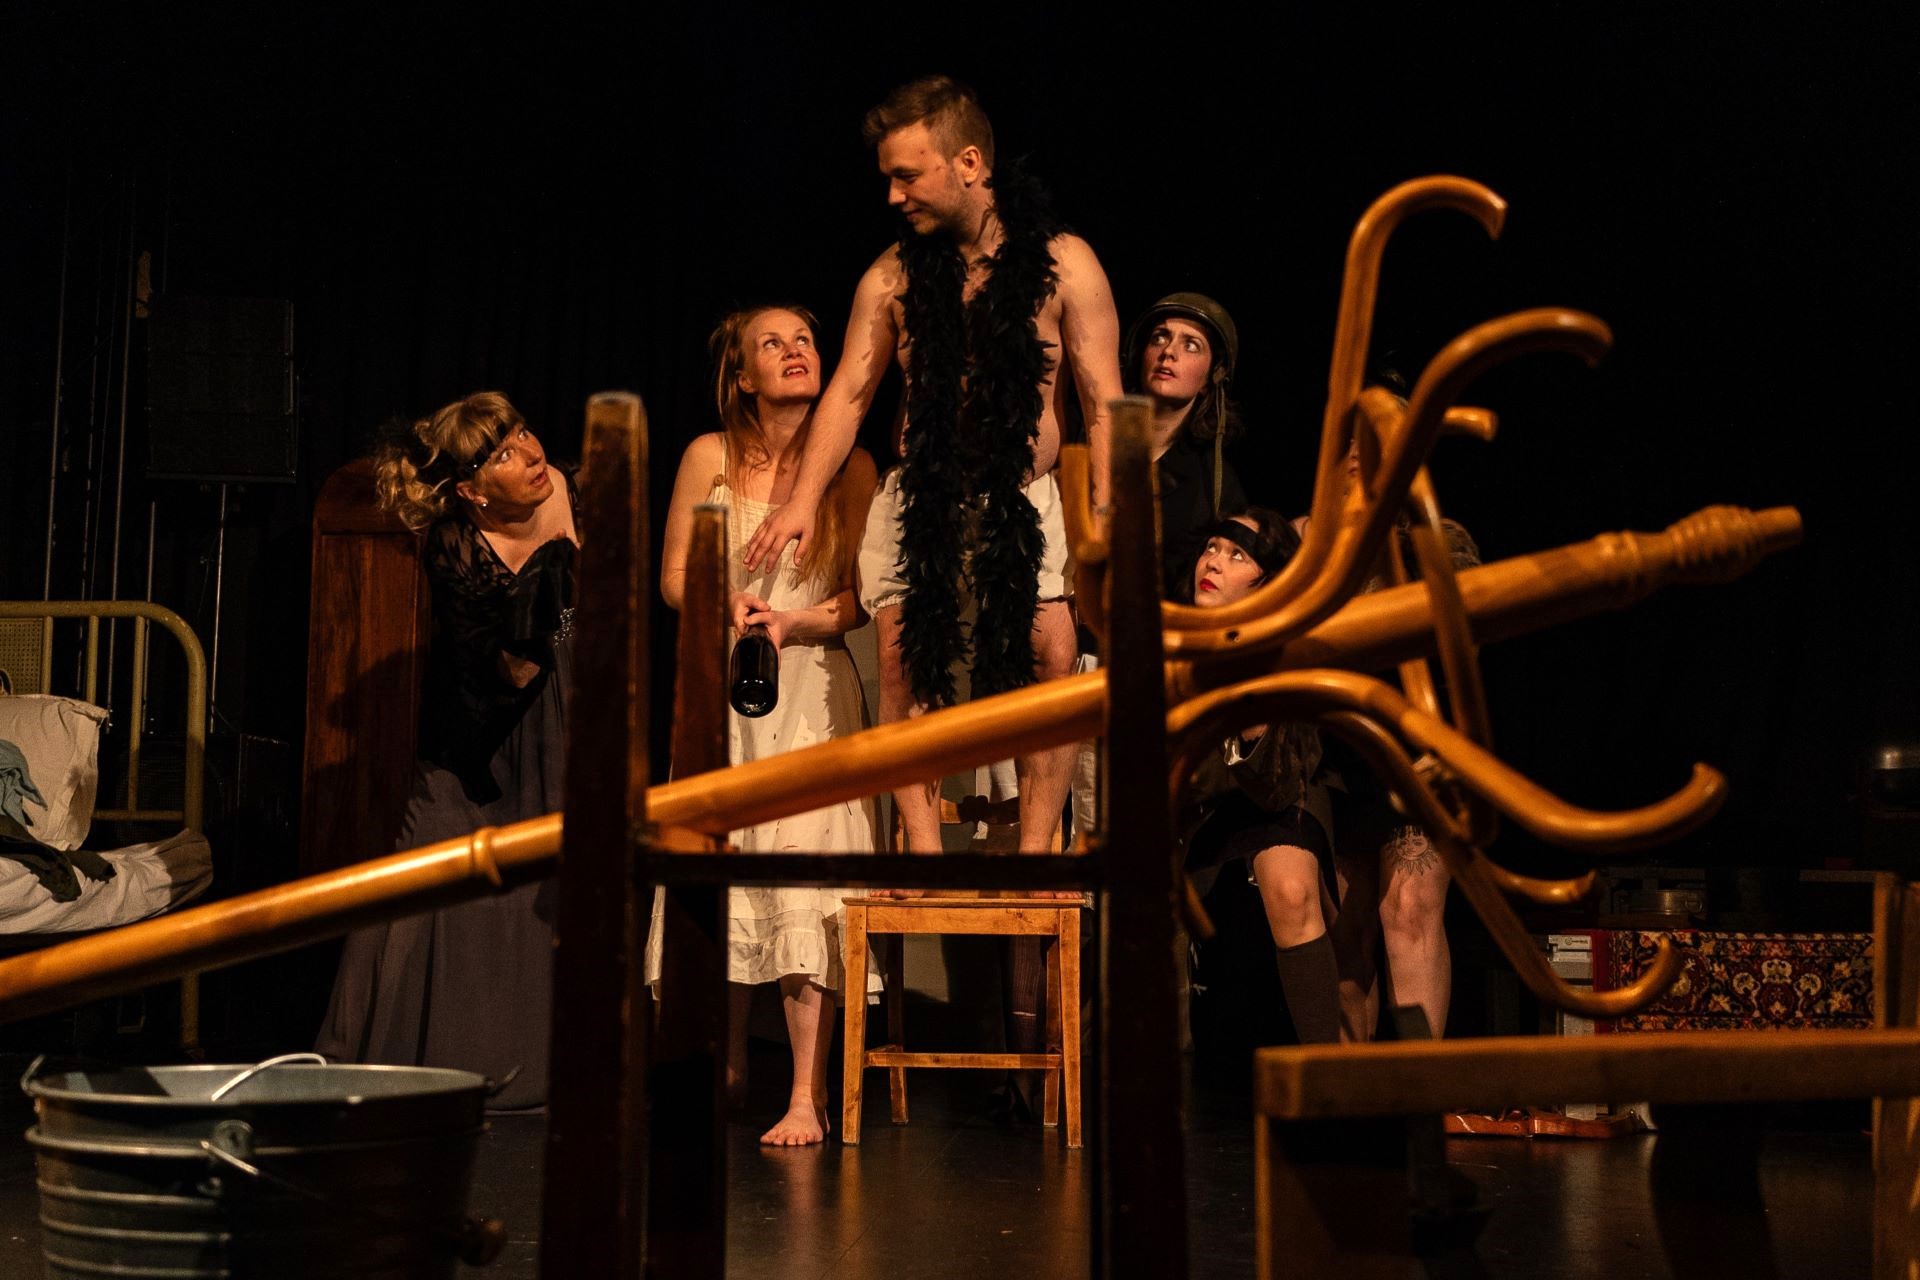 Performance, theater students on stage